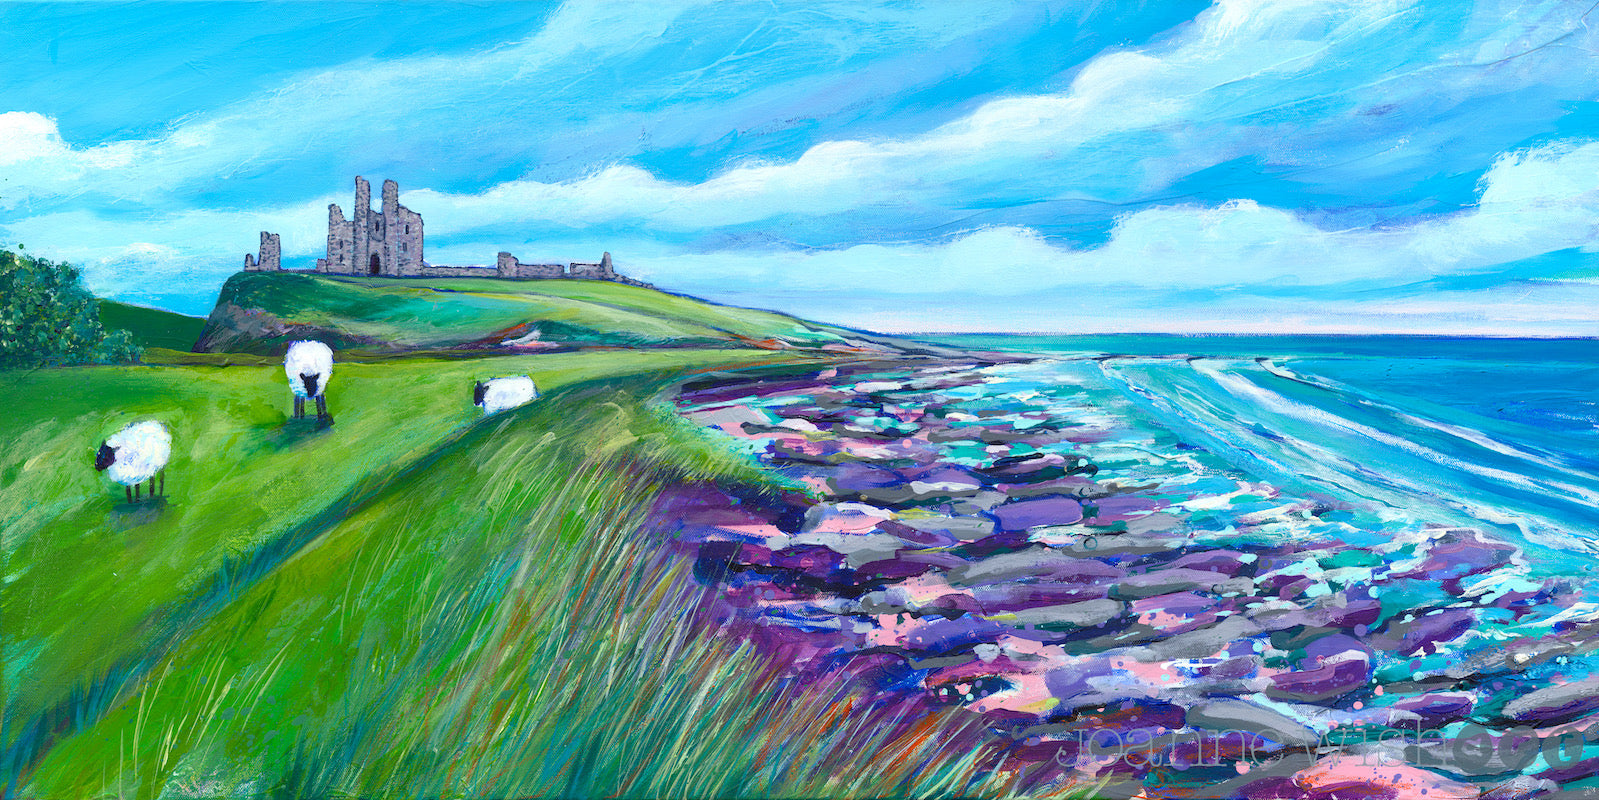 A summery painting of Dunstanburgh Catle showing three sheep grazing on the landscape with the castle behind. The sea is rolling in onto the rocks.